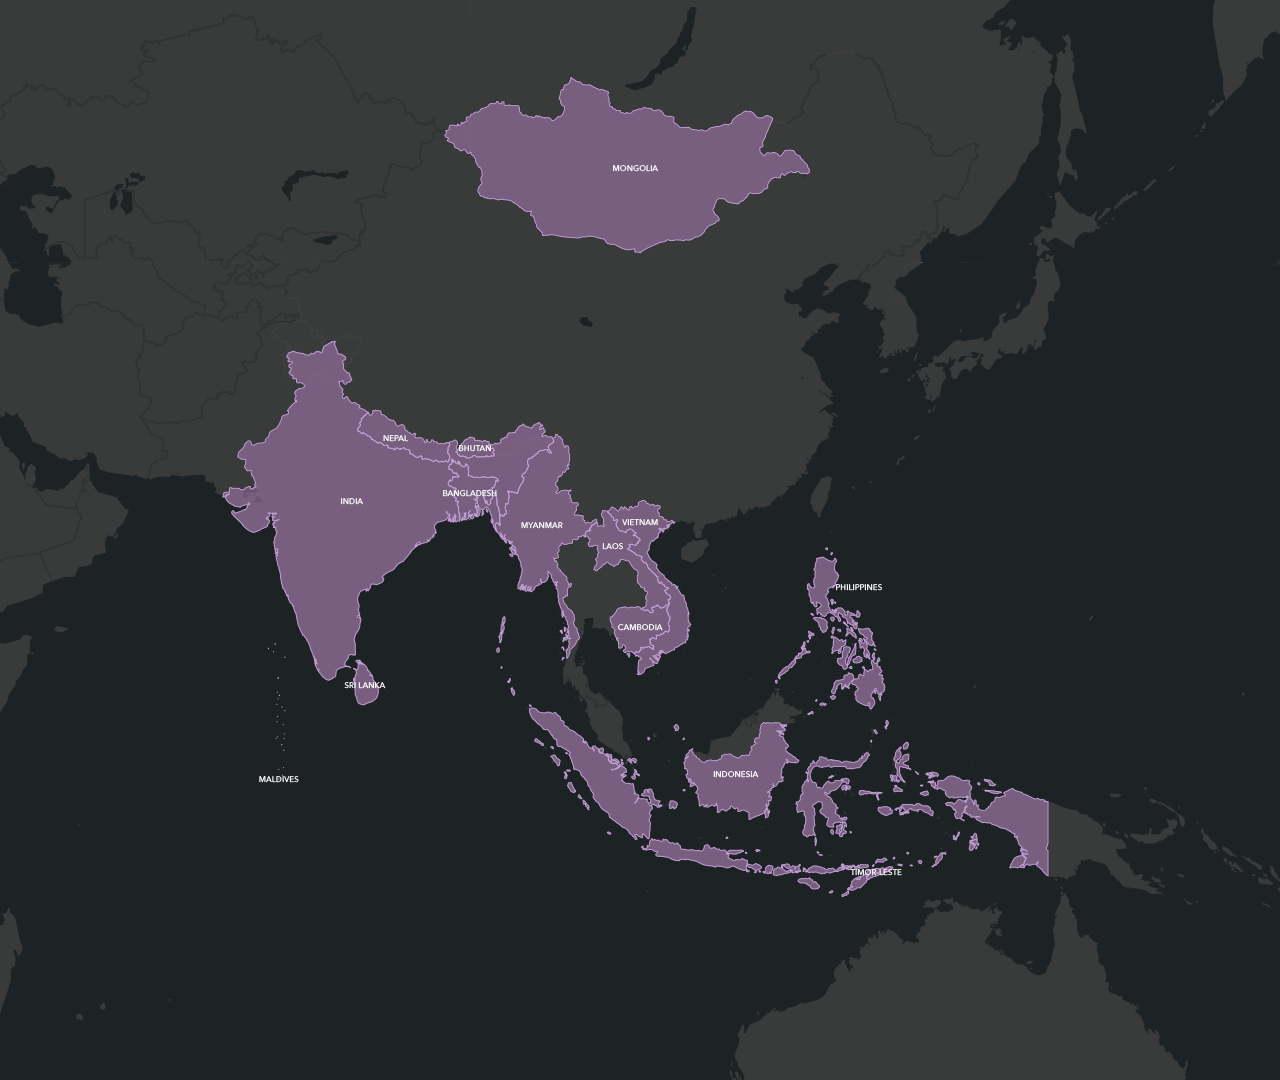 Map of Asia Pacific in dull lavender on a dark gray background with countries outlined and labeled in white